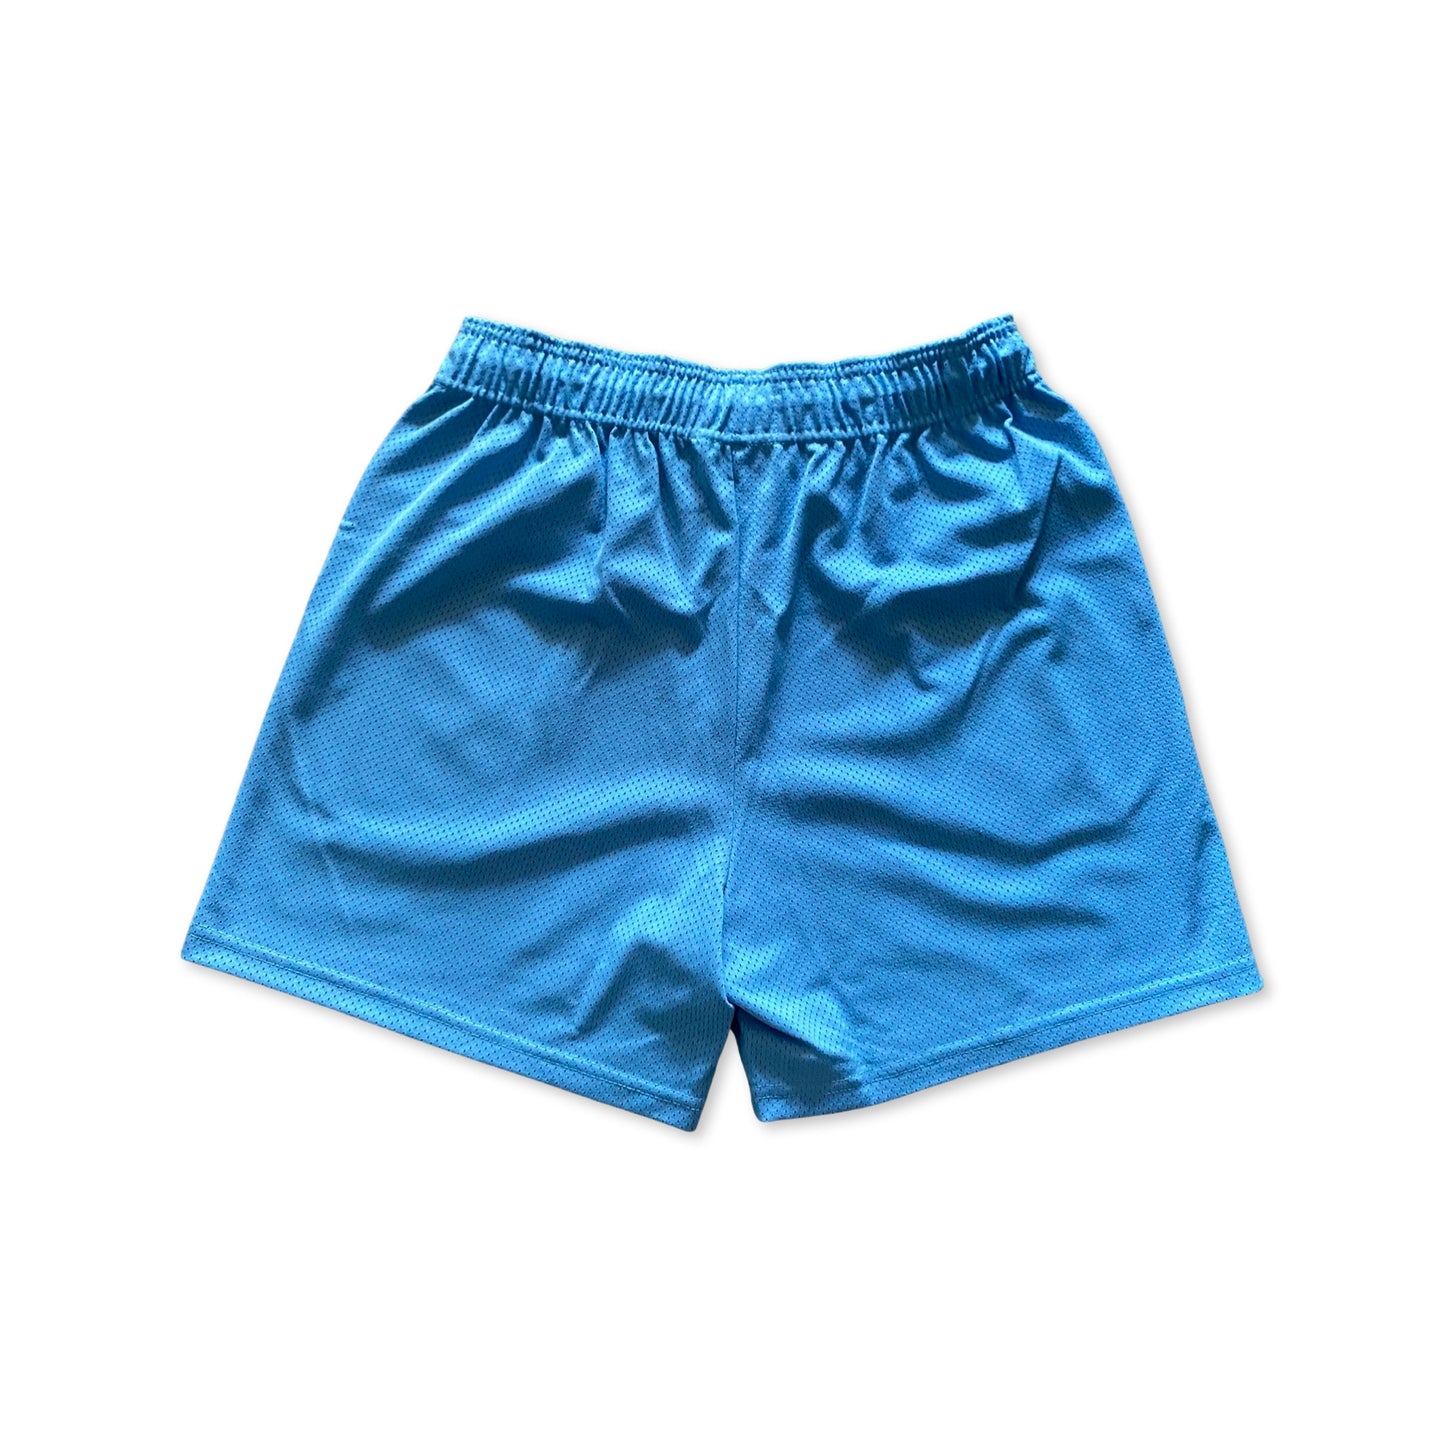 Eric Emanuel Chargers Shorts